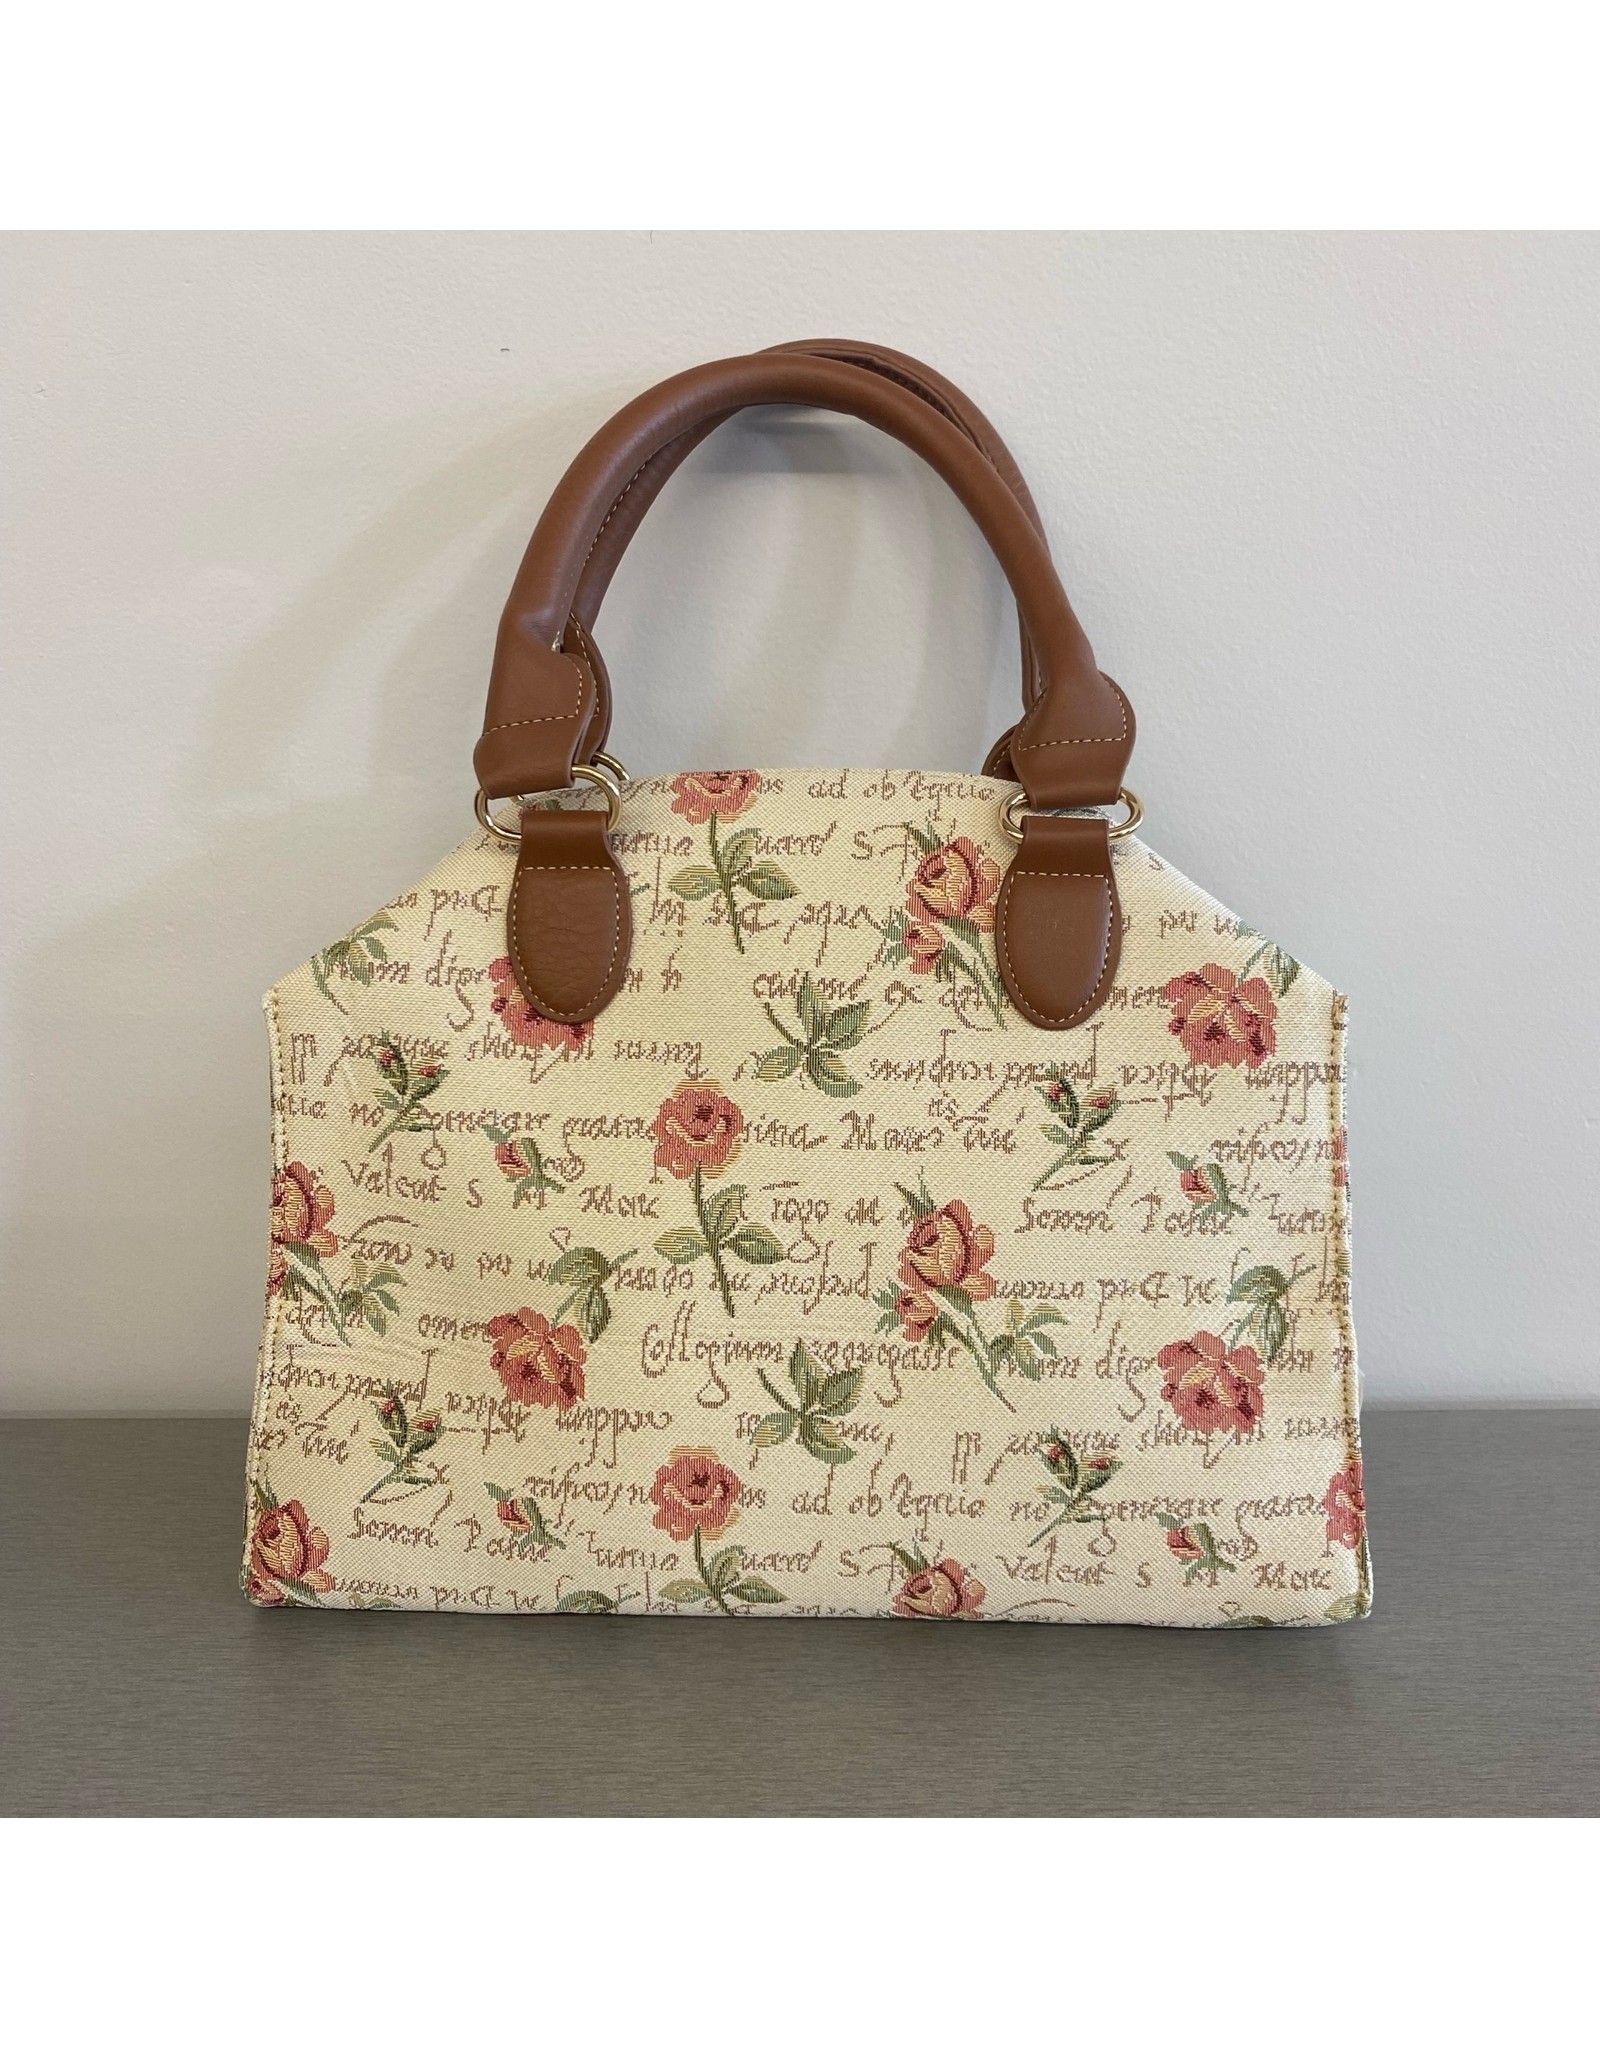 Arched Bag- English rose